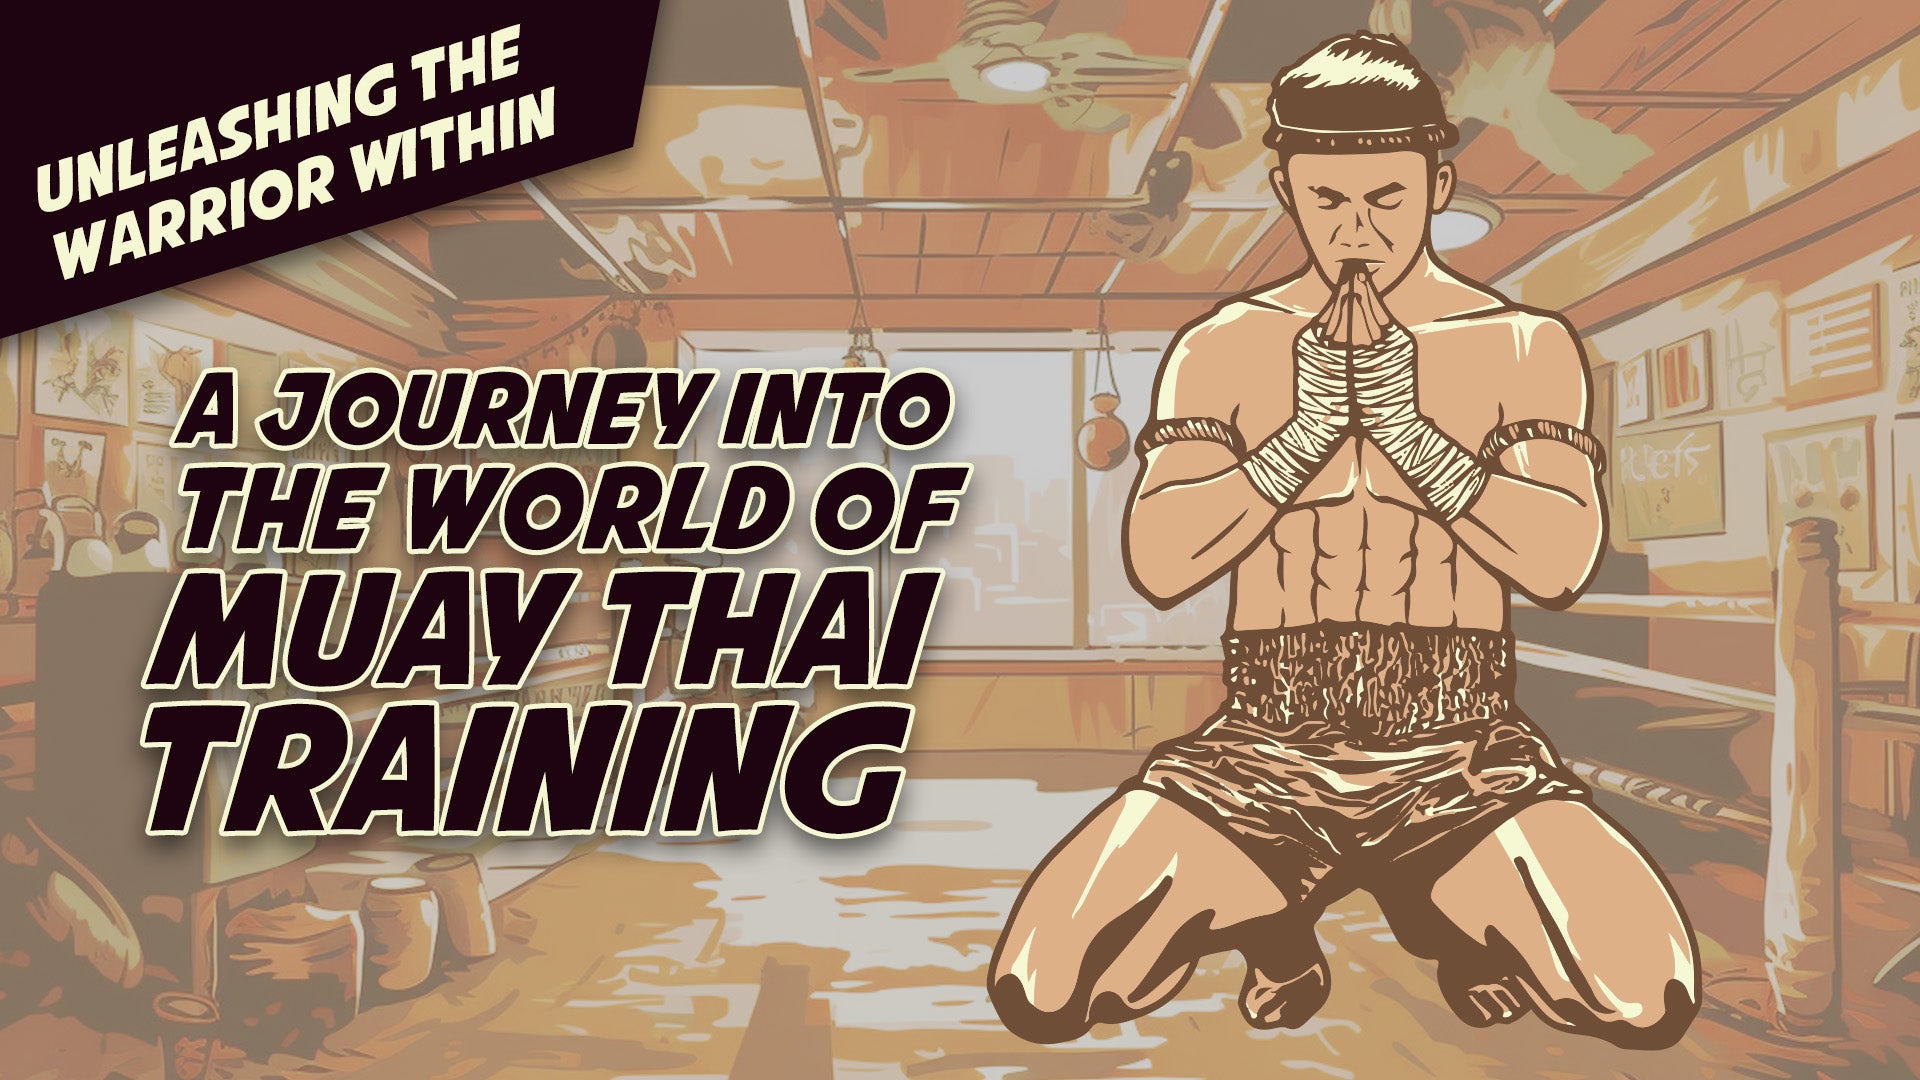 Unleashing the Warrior Within: A Journey into the World of Muay Thai Training